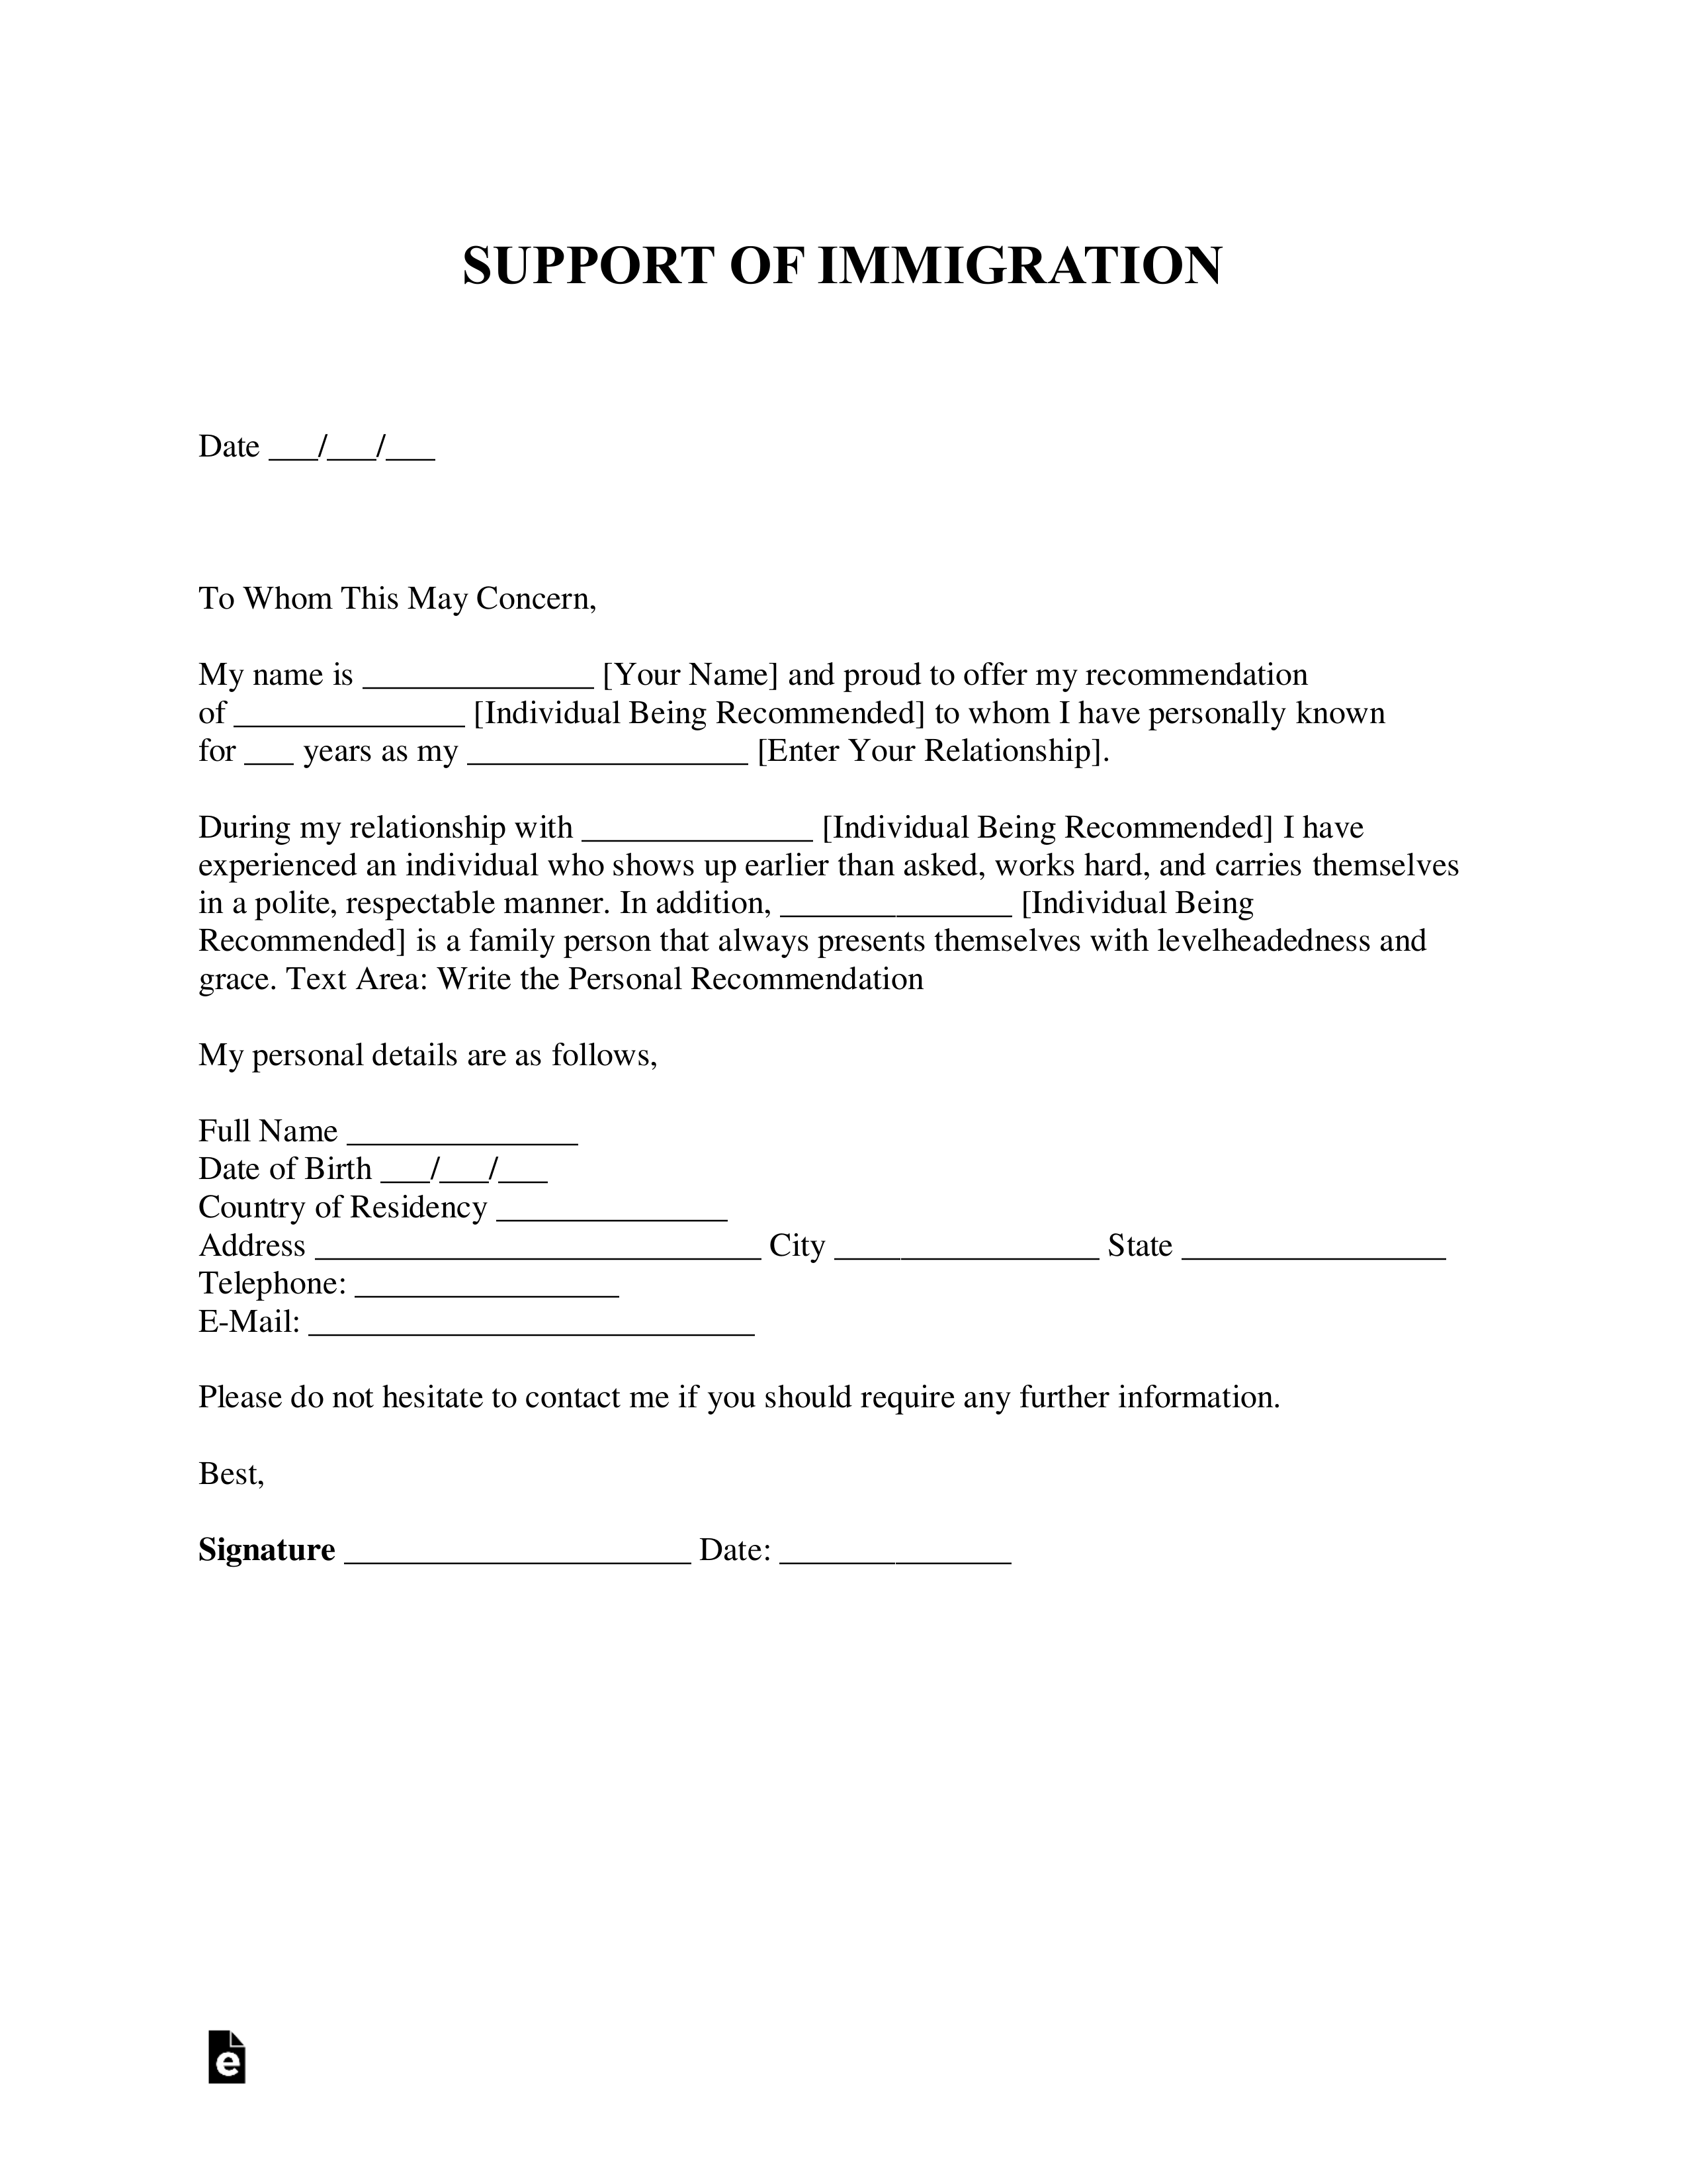 Sample Of Supporting Letter For Immigration from eforms.com